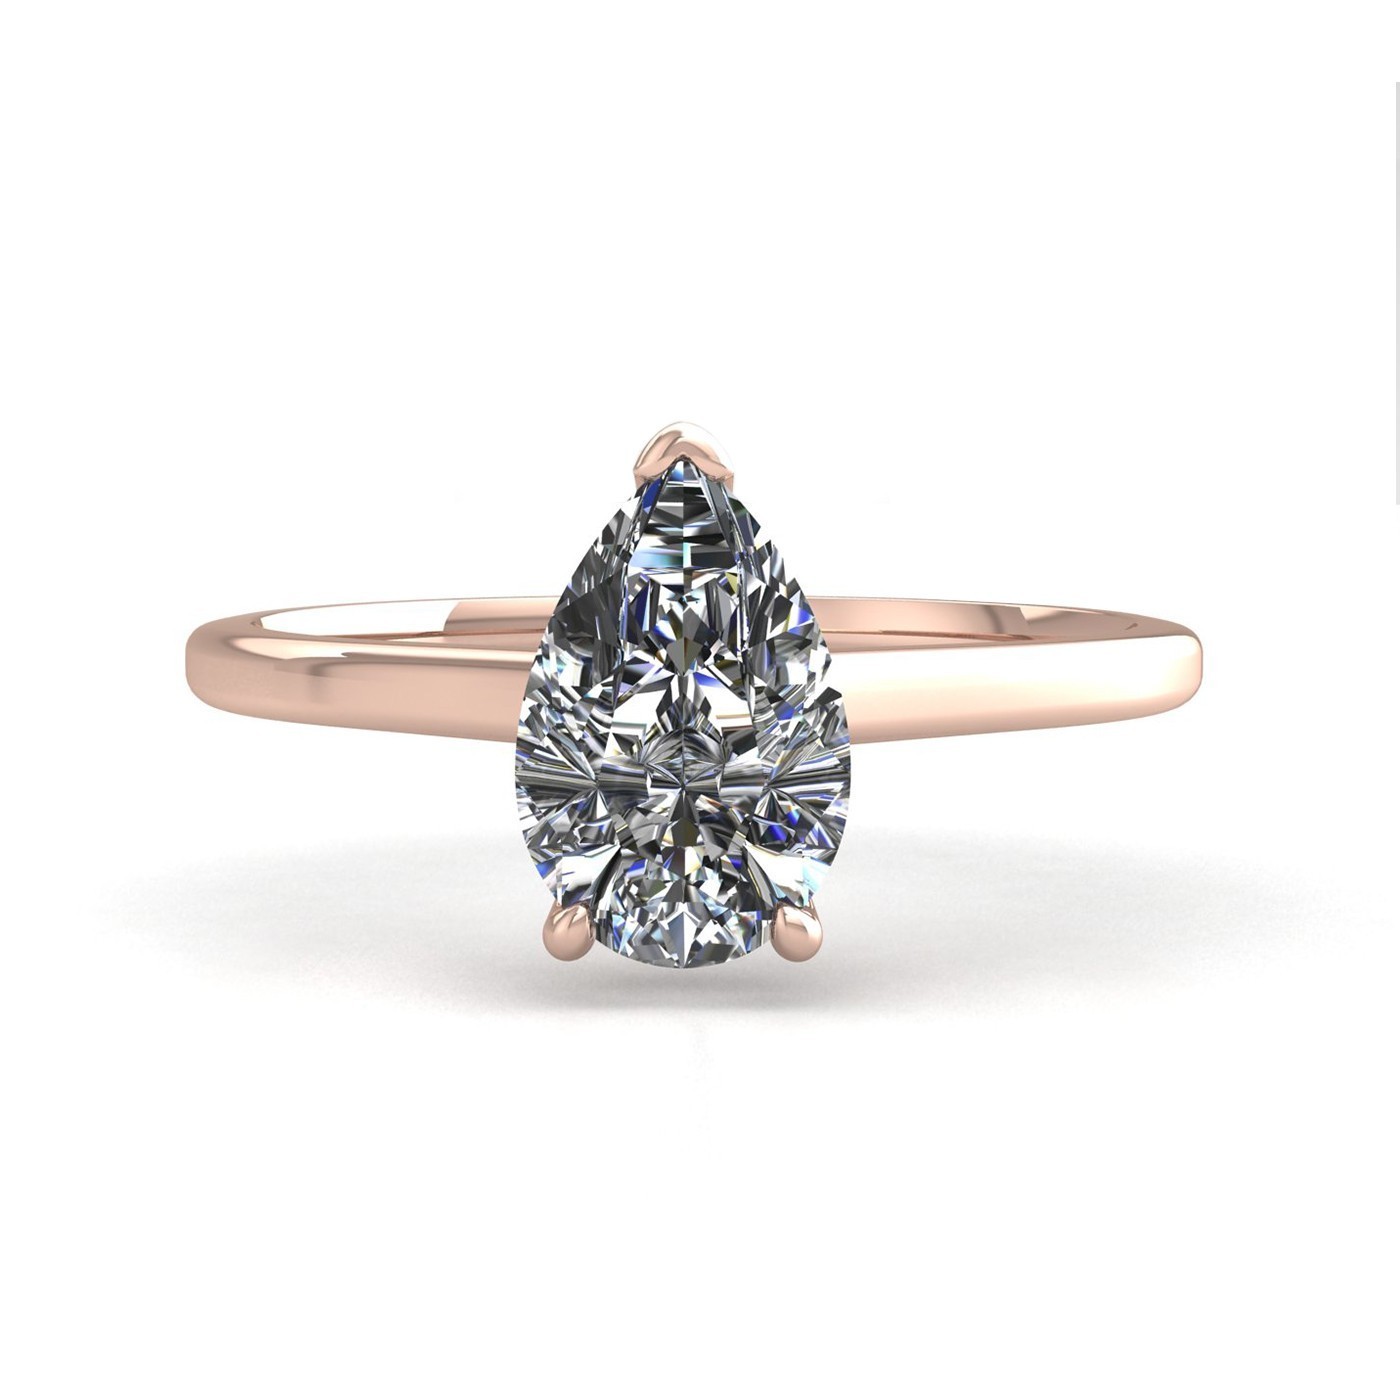 18K ROSE GOLD 3 PRONGS SOLITAIRE PEAR CUT DIAMOND ENGAGEMENT RING WITH WHISPER THIN BAND